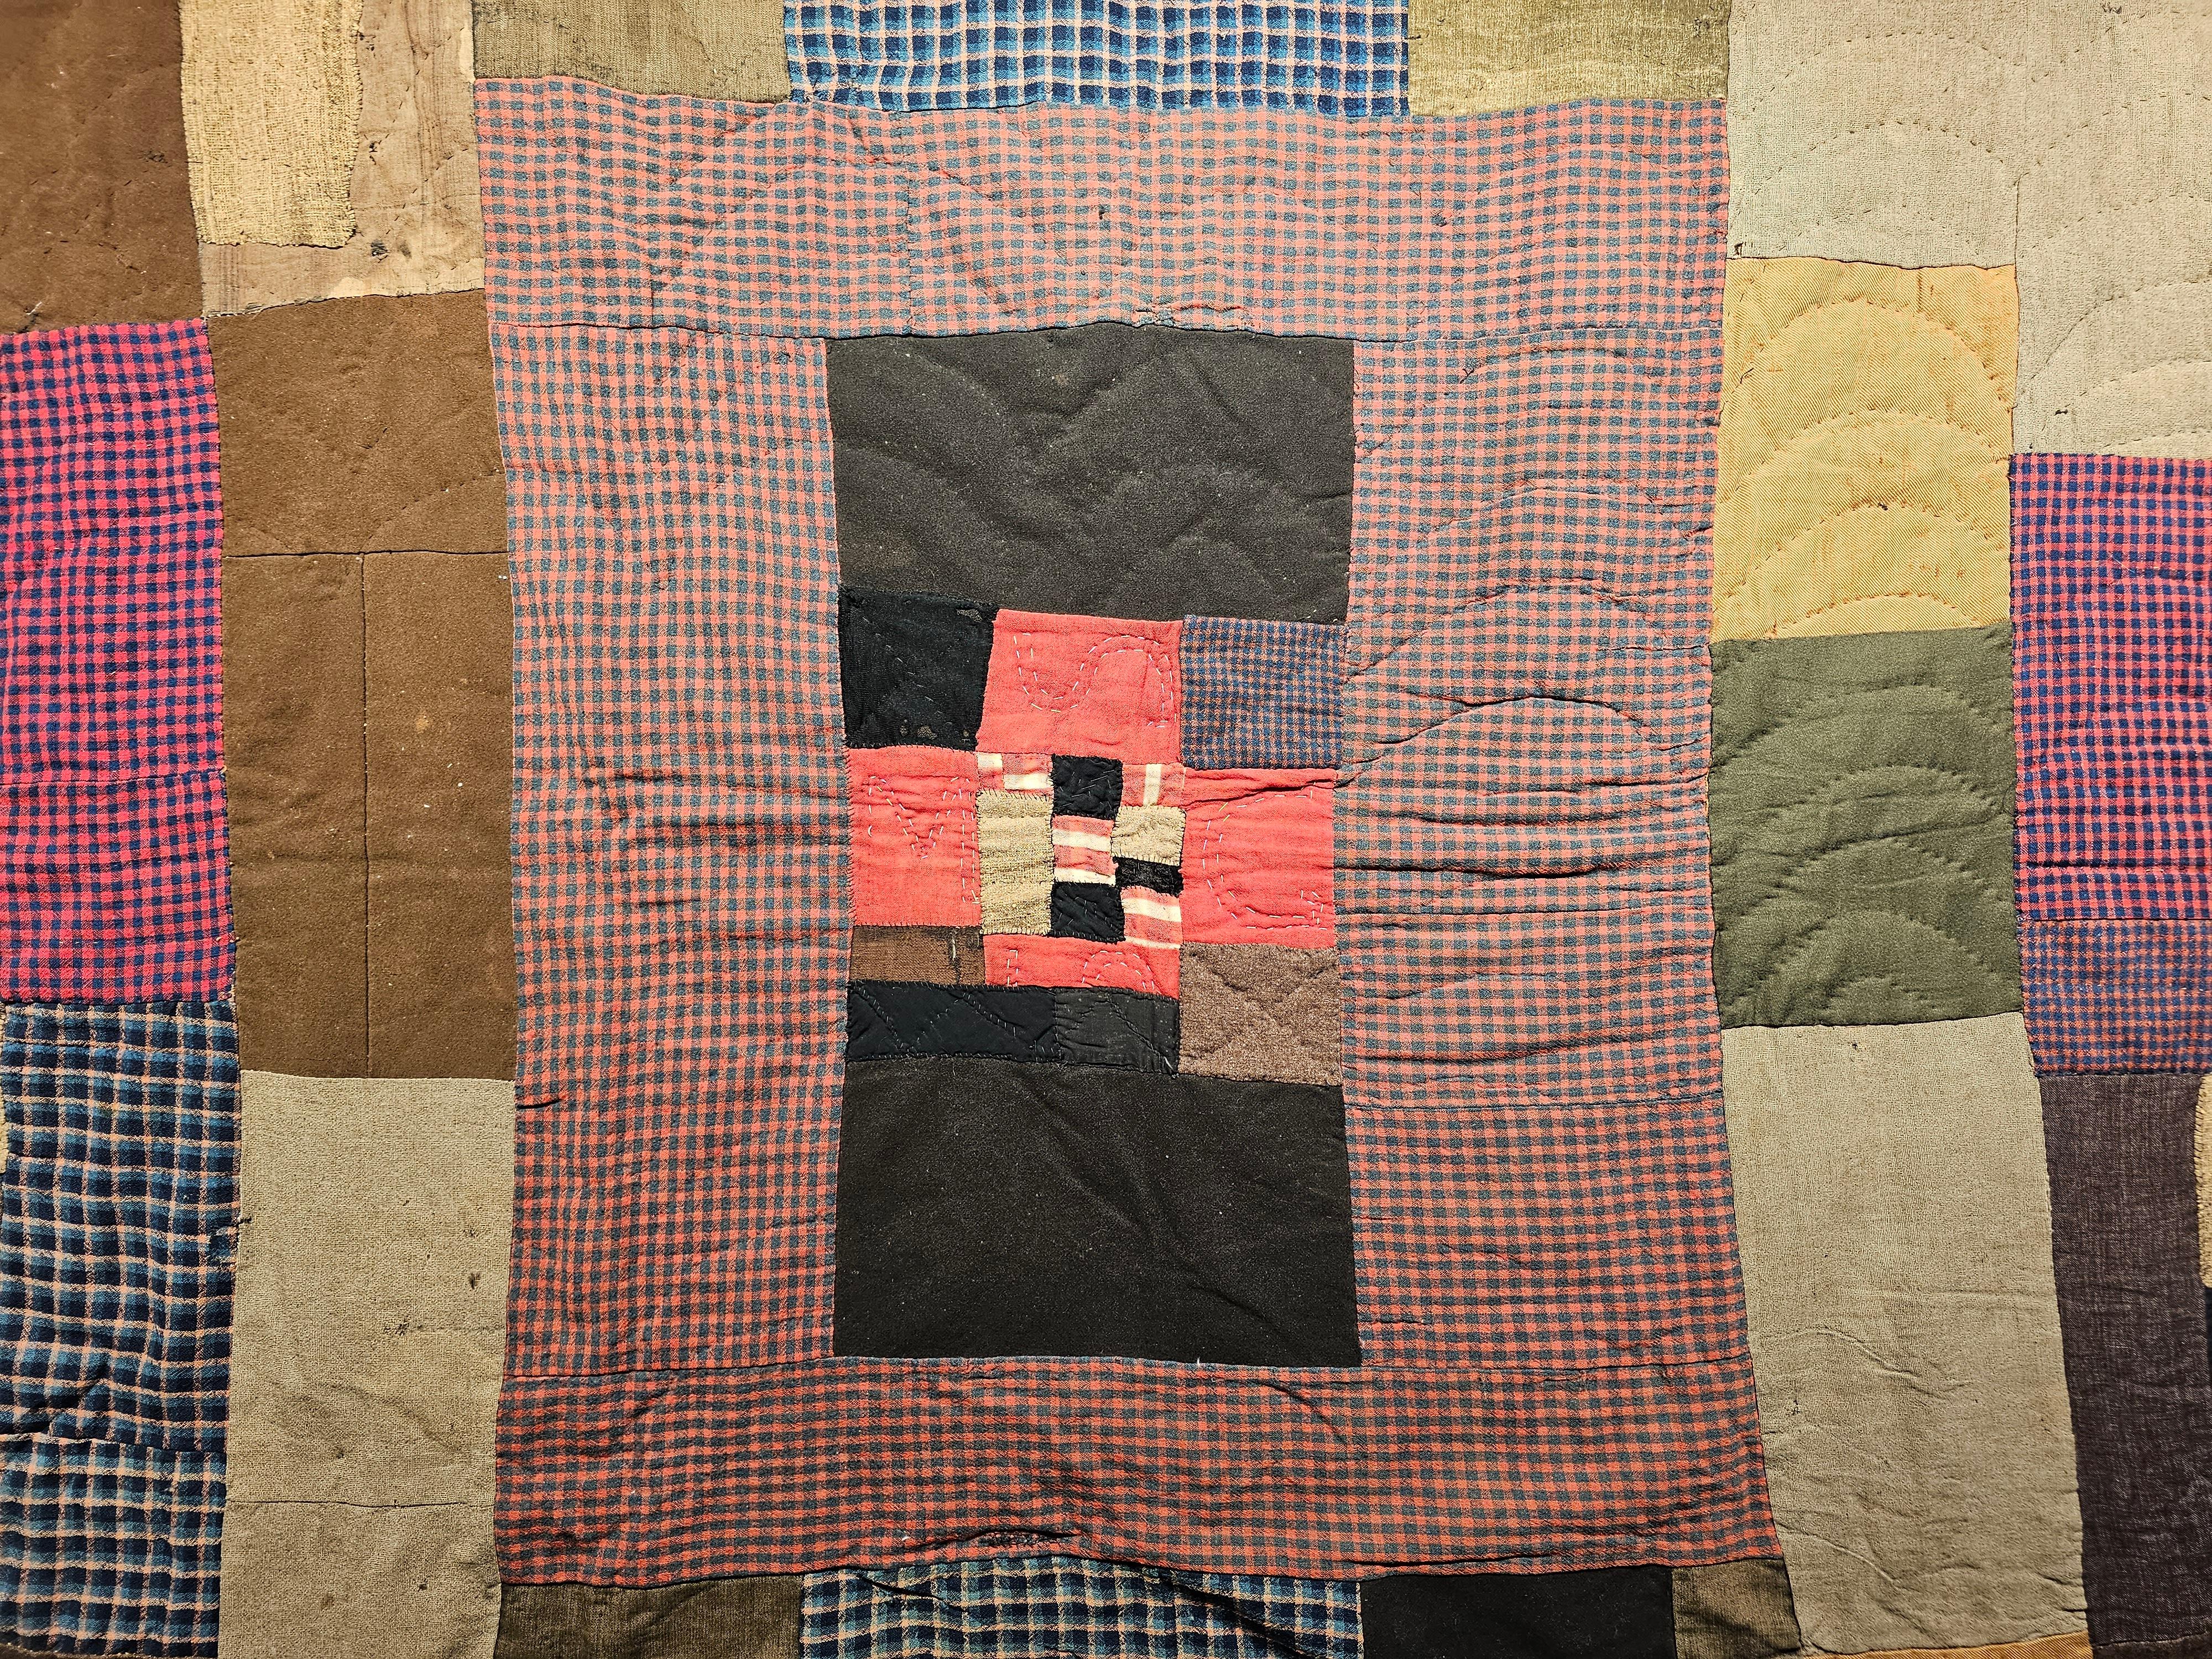 Hand-Crafted 19th Century African American Southern Quilt Possibly of Gee’s Bend, Alabama